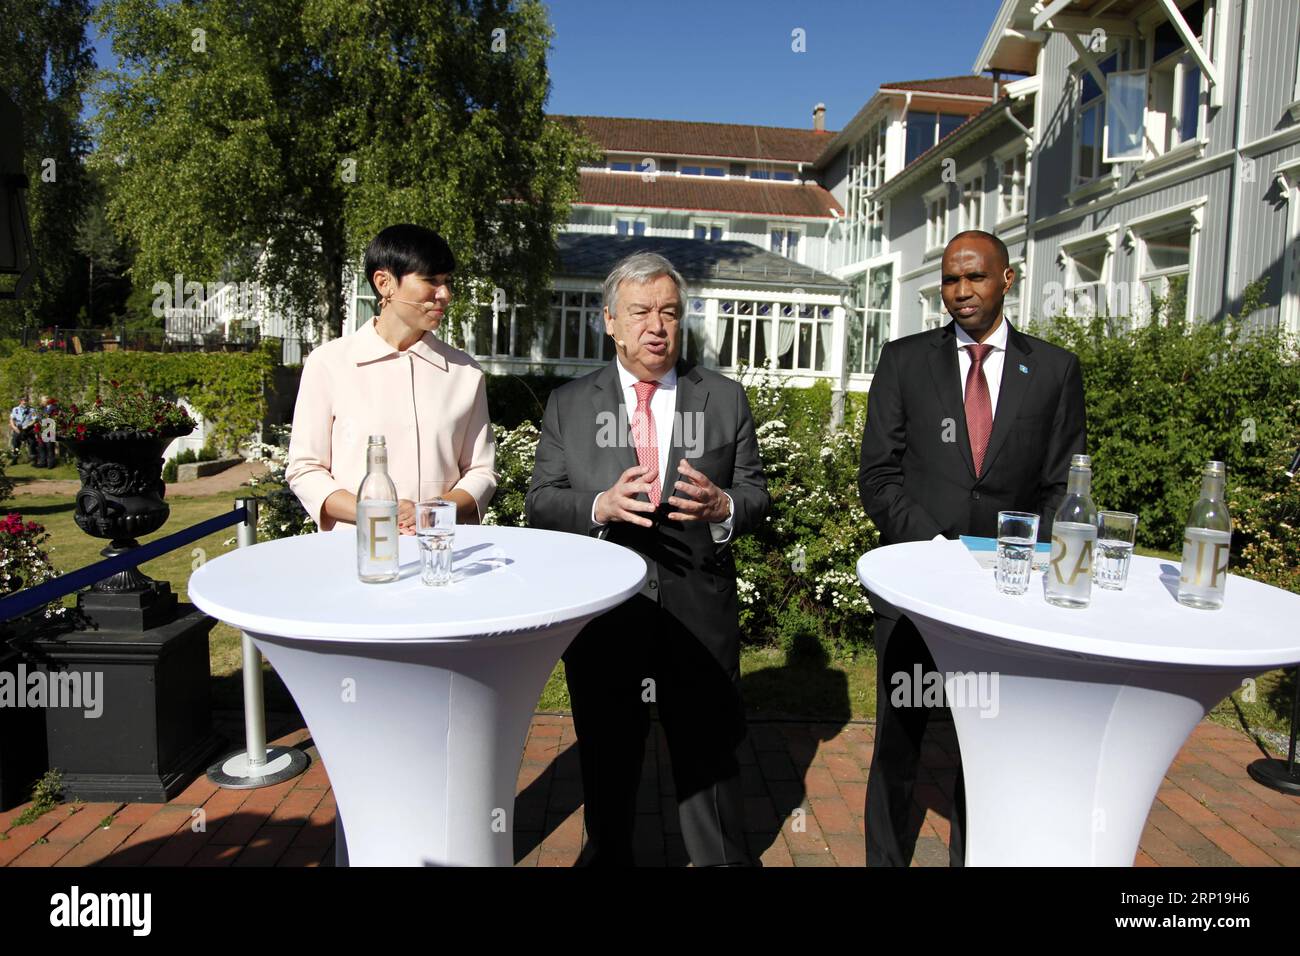 (180619) -- OSLO, June 19, 2018 -- UN Secretary-General Antonio Guterres (C), Norwegian Minister of Foreign Affairs Ine Eriksen Soreide (L), and Somalian Prime Minister Hassan Ali Khaire, attend a joint press conference in Oslo, capital of Norway, on June 19, 2018. UN Secretary-General Antonio Guterres said on Tuesday that more mediation is needed as the world is dangerous and the situation is deteriorating. ) NORWAY-OSLO-OSLO FORUM-UN-CHIEF-PRESS CONFERENCE LiangxYouchang PUBLICATIONxNOTxINxCHN Stock Photo